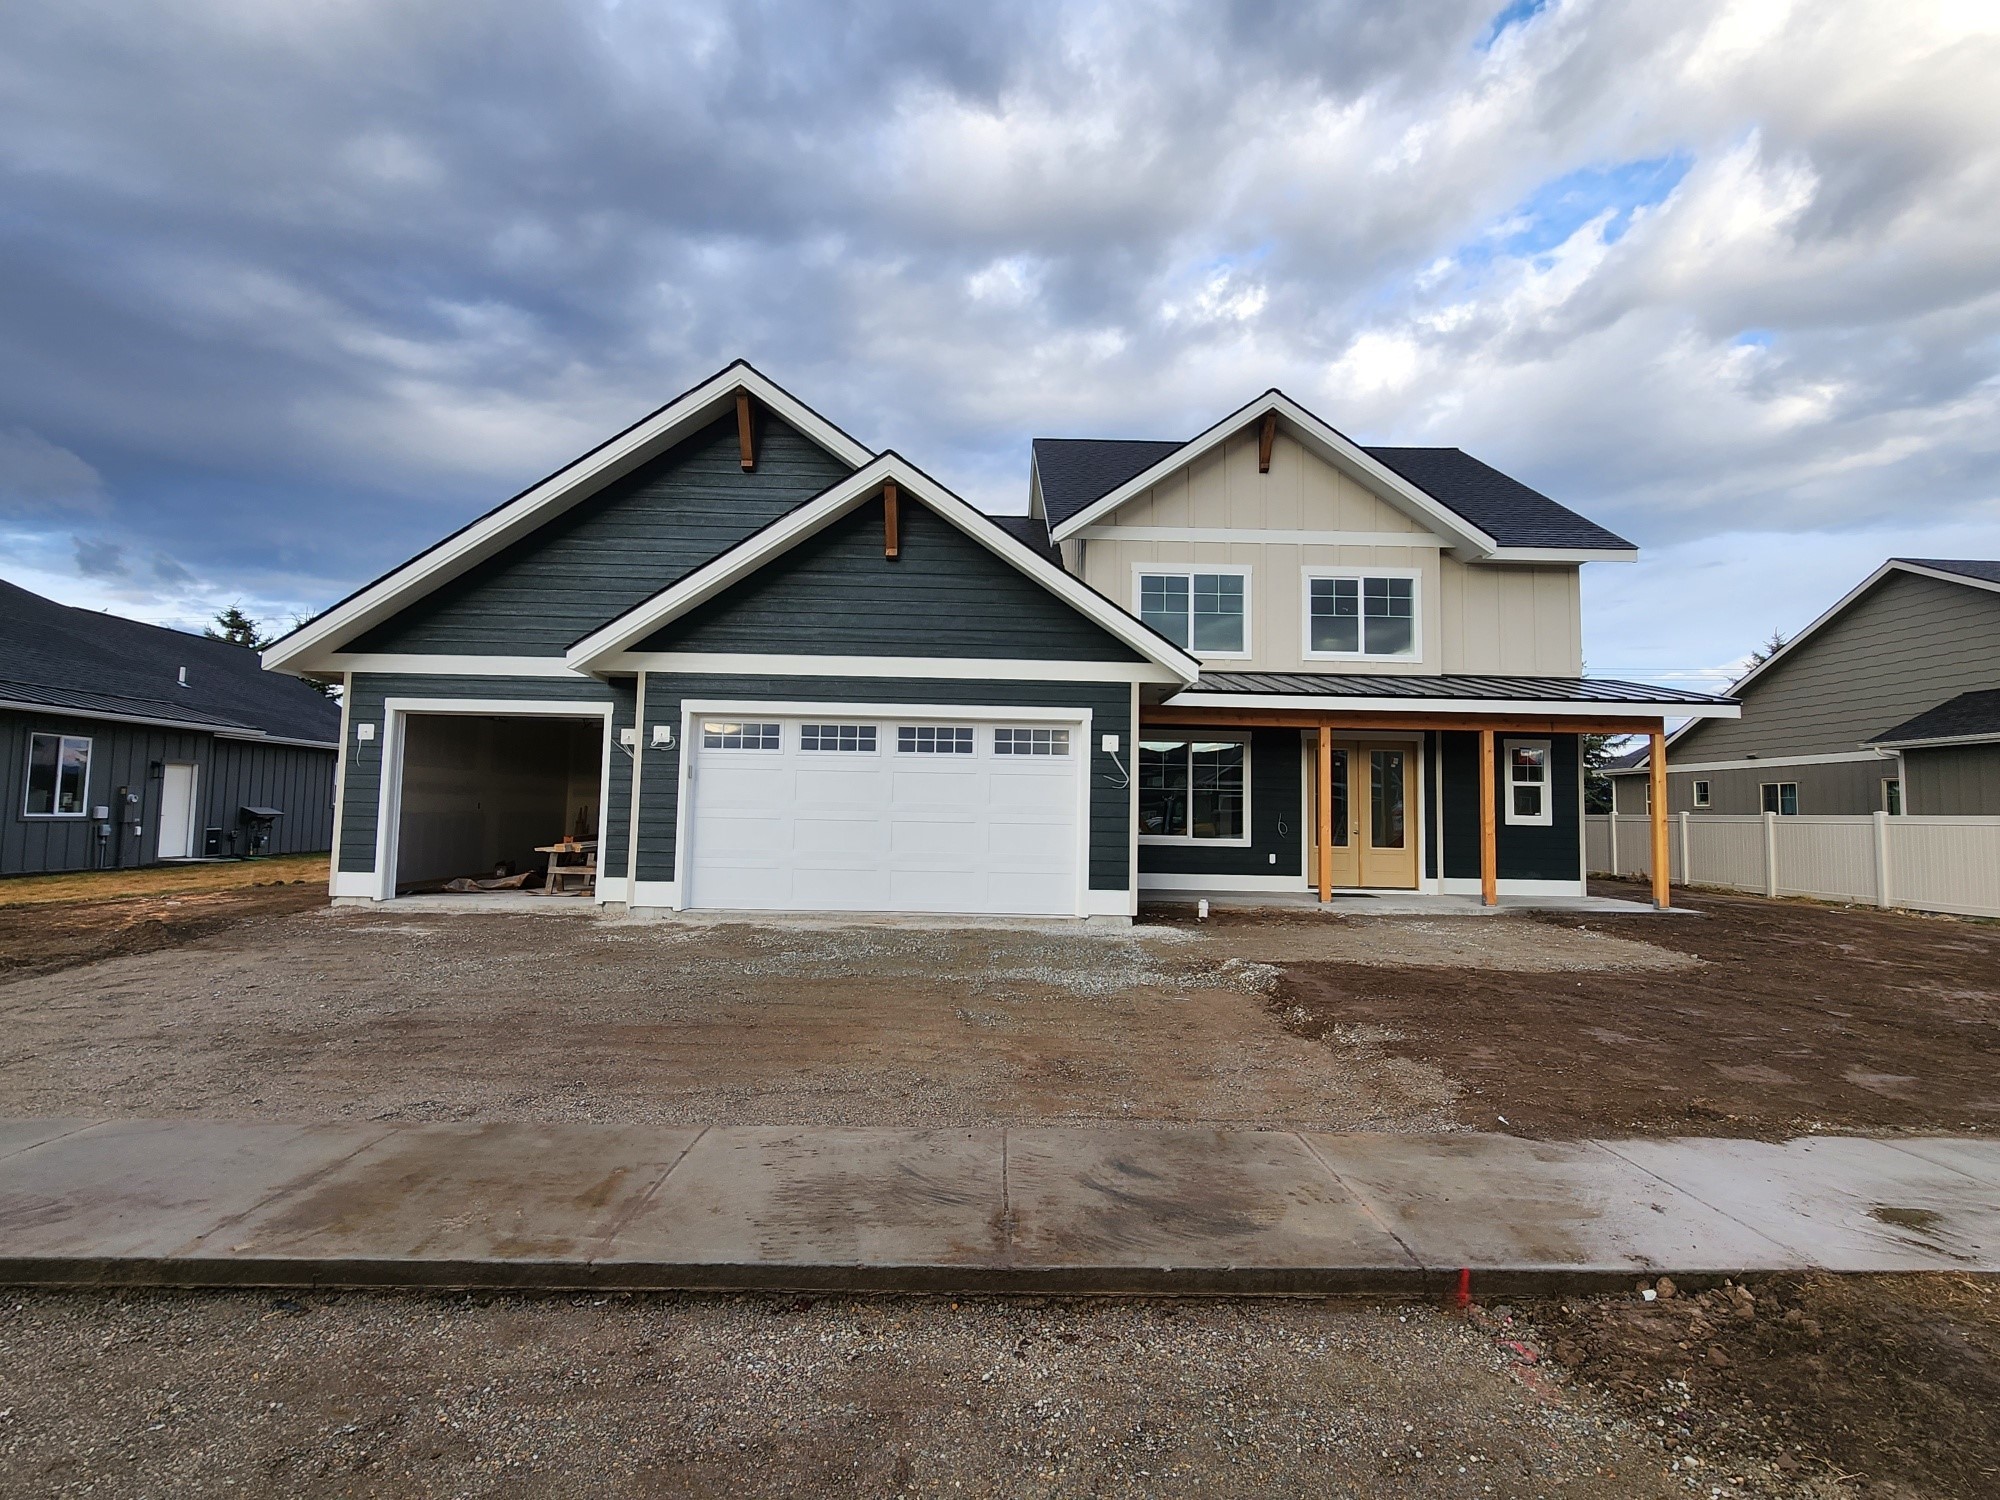 2 weeks from completion and will be ready to call home! This 4 bed 3 bath home with a 3-car garage is nestled in the amazing community of West View Estates in Kalispell. This is an IRON STAR CONSTRUCTION home, which means you can expect the highest quality craftsmanship throughout. The open floor plan is perfect for entertaining, it has the main level living, with a large family room, and high-end finishes throughout. Gas range, fireplace, and furnace with A/C are a few features this home has to offer. Landscaping coming soon! Please call Jill Brass at 406-253-7369 or your real estate professional.